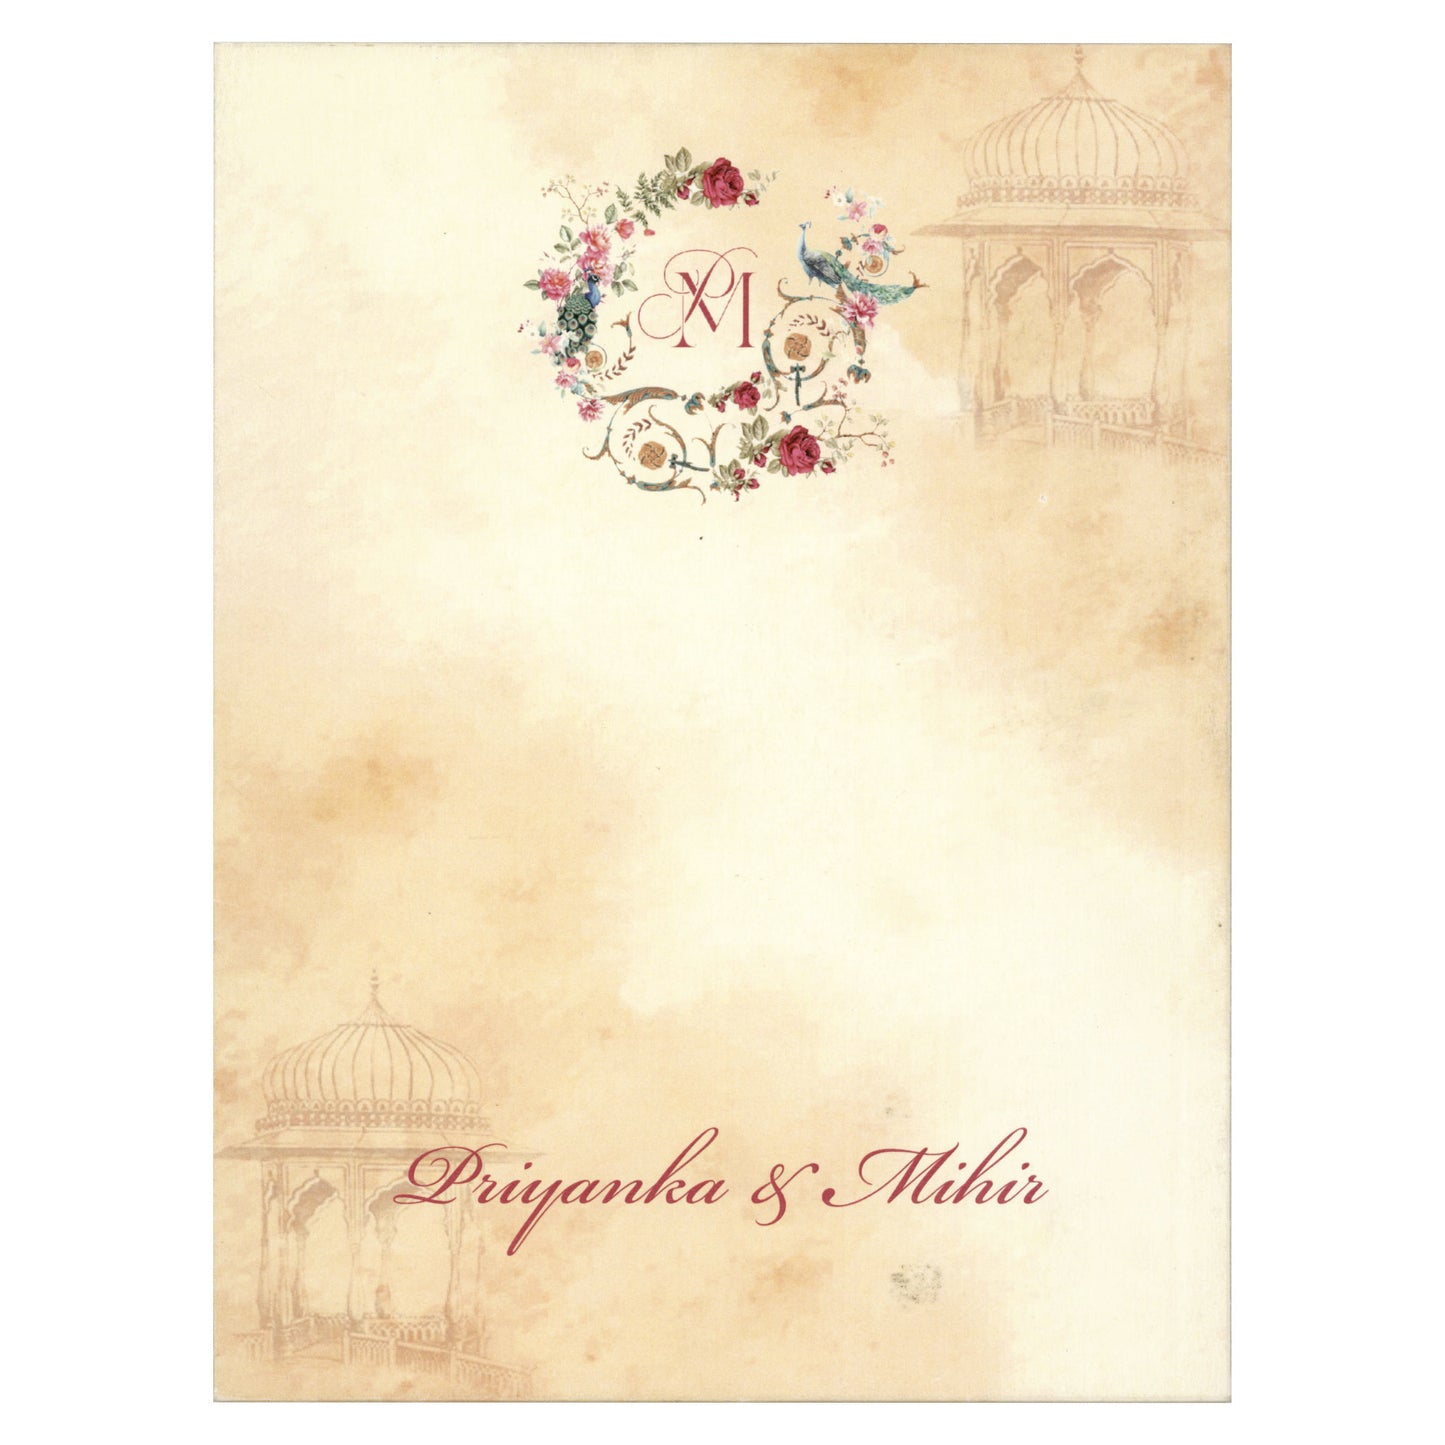 Traditional Wedding Cards with Royal Theme | SS - 5006